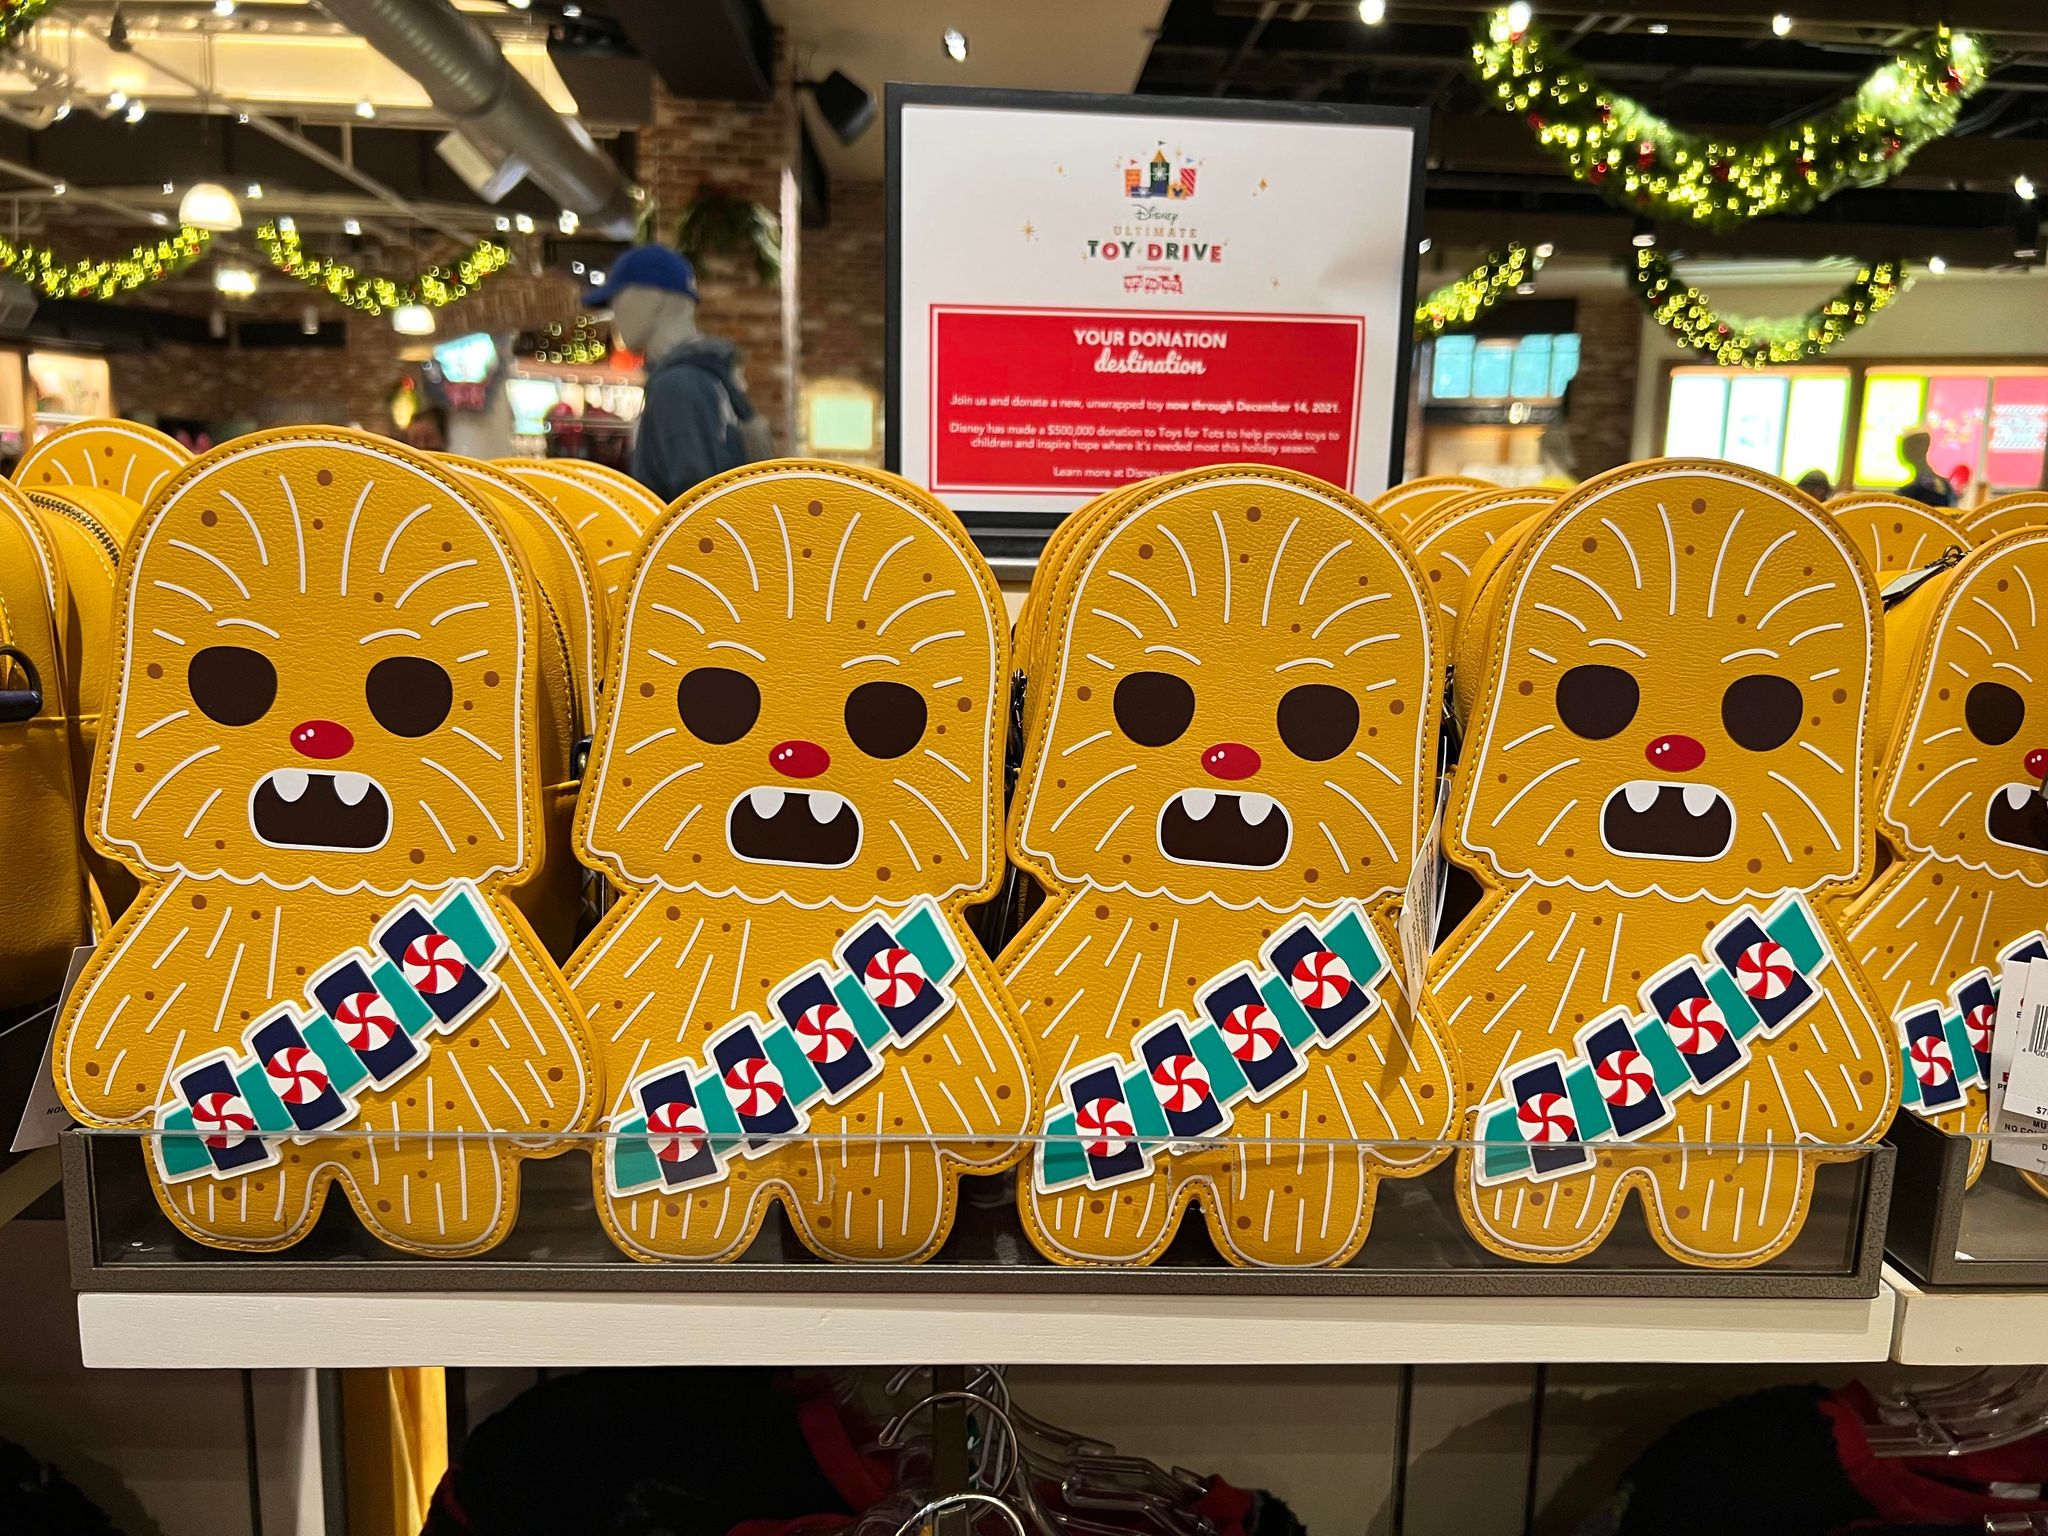 PHOTOS: New Christmas Treats and Gingerbread Cookie Chewbacca